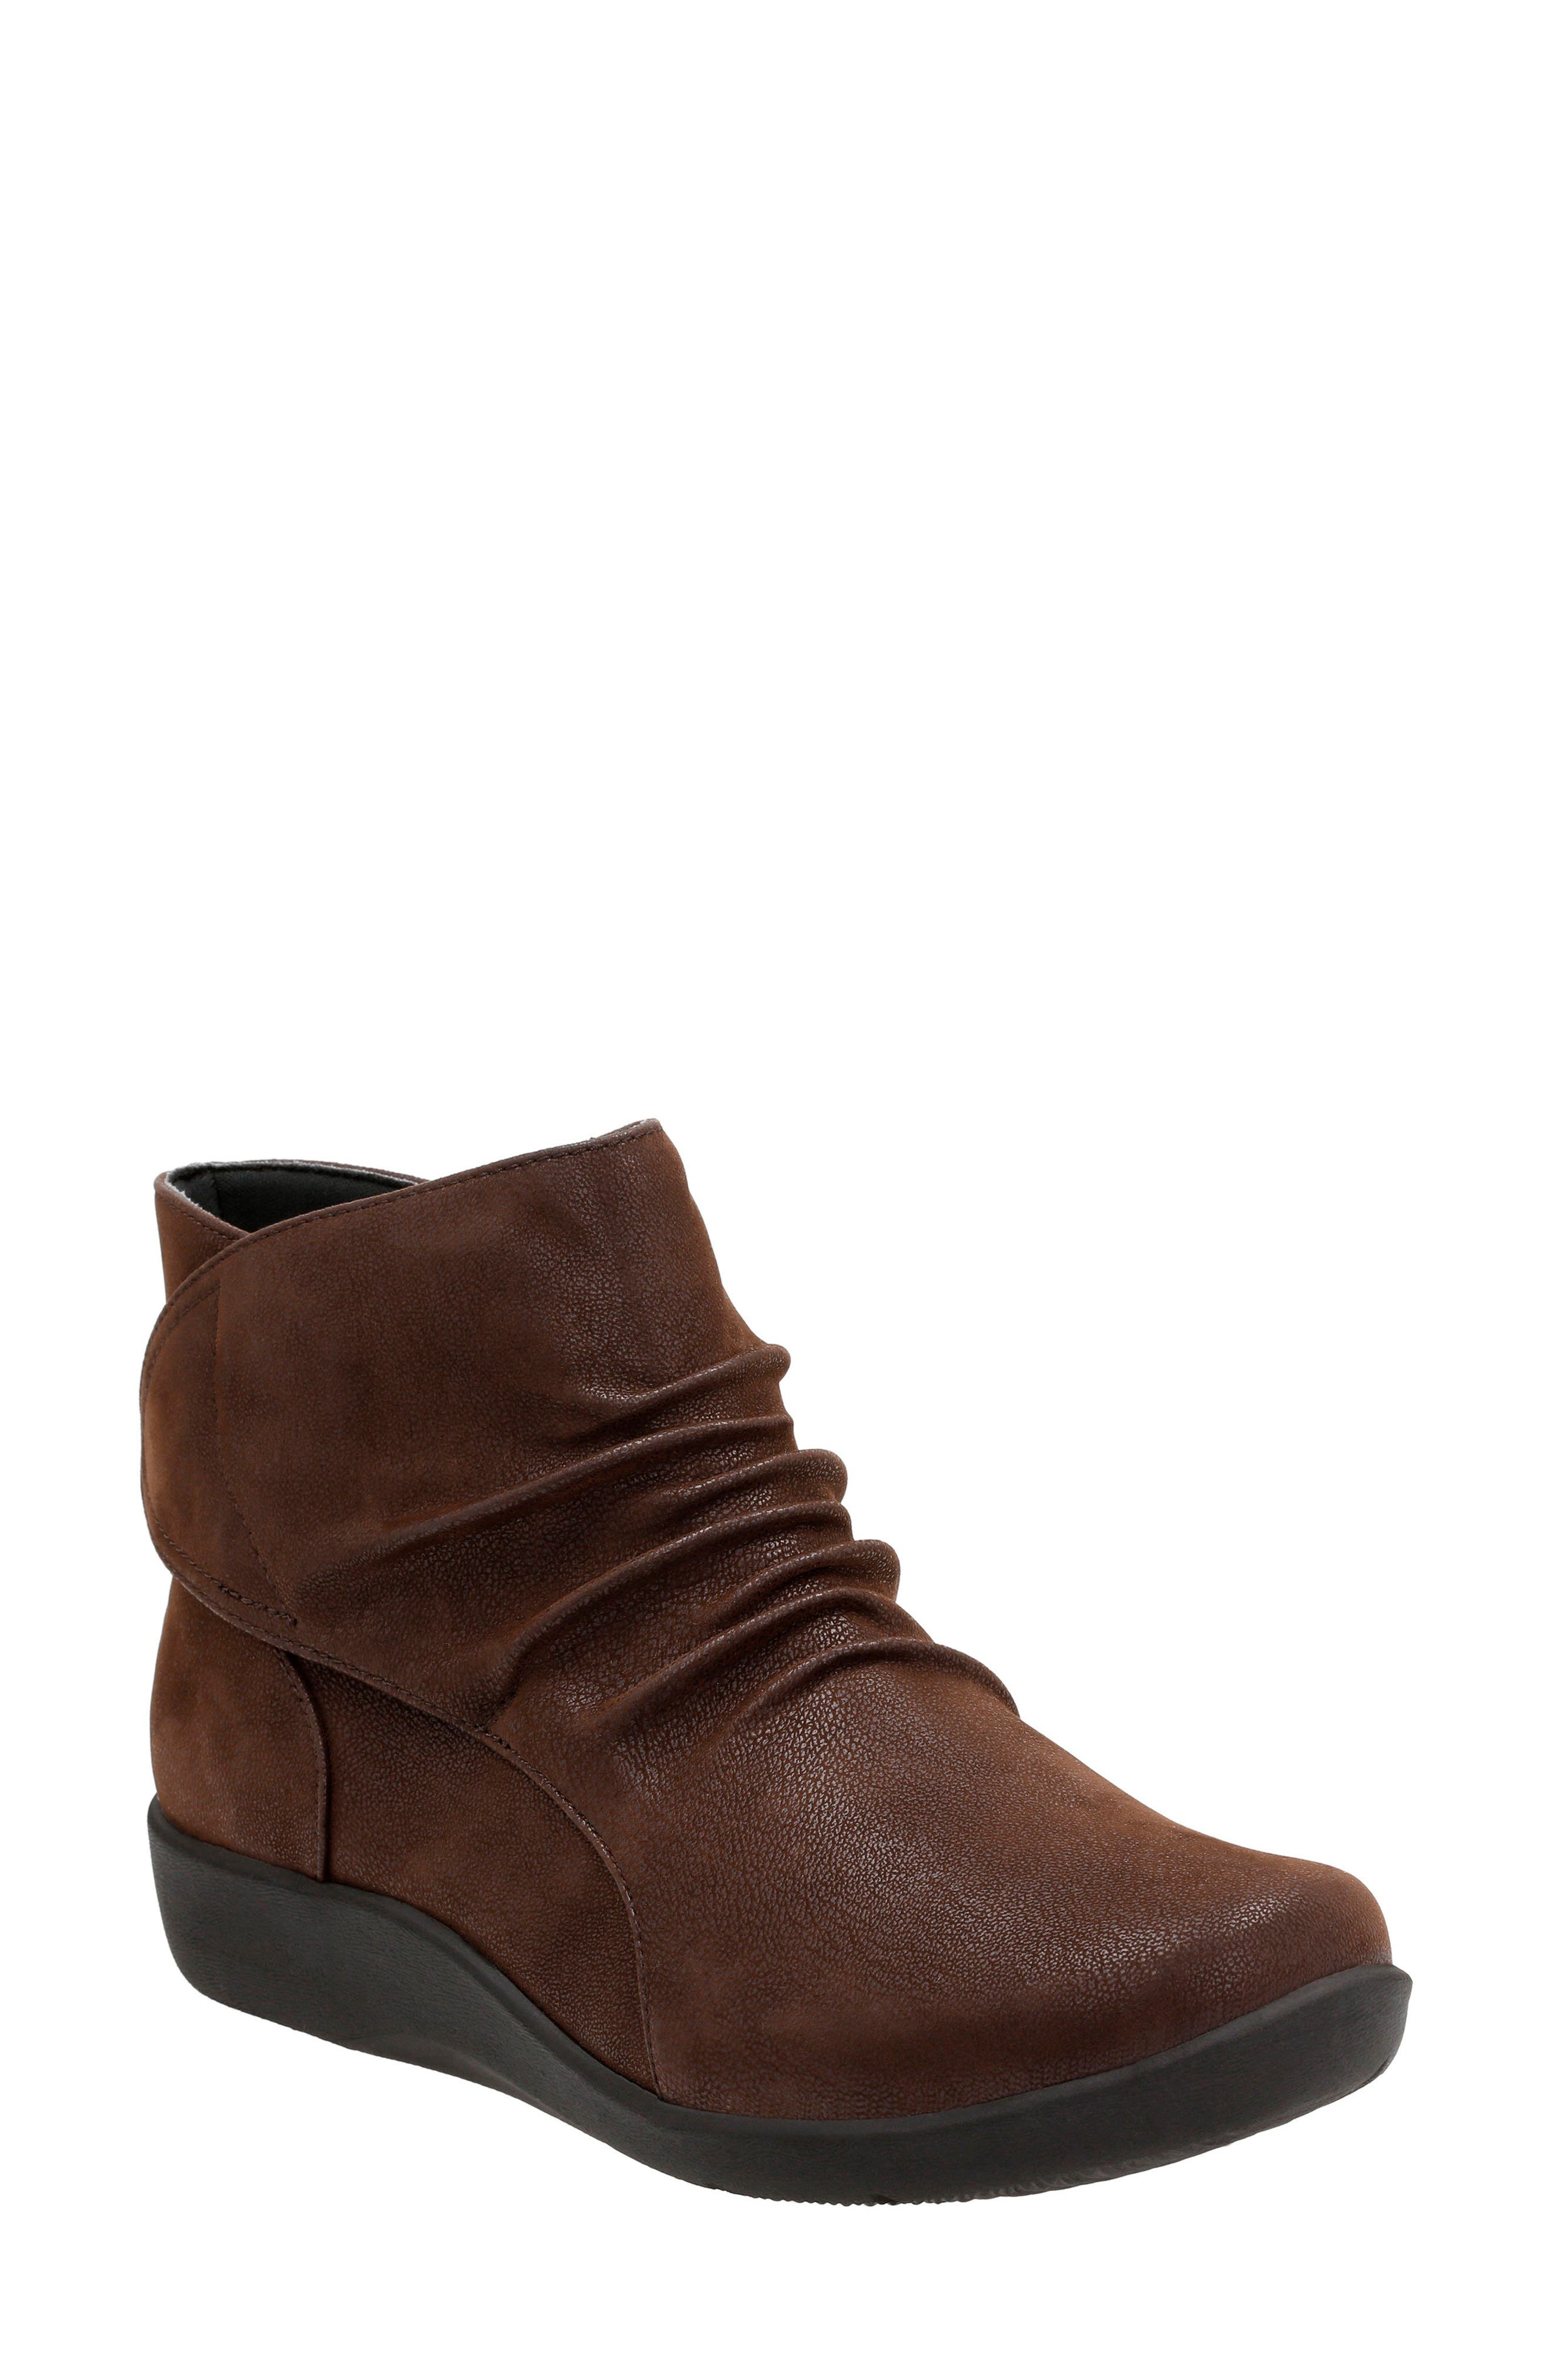 sillian sway ankle boots